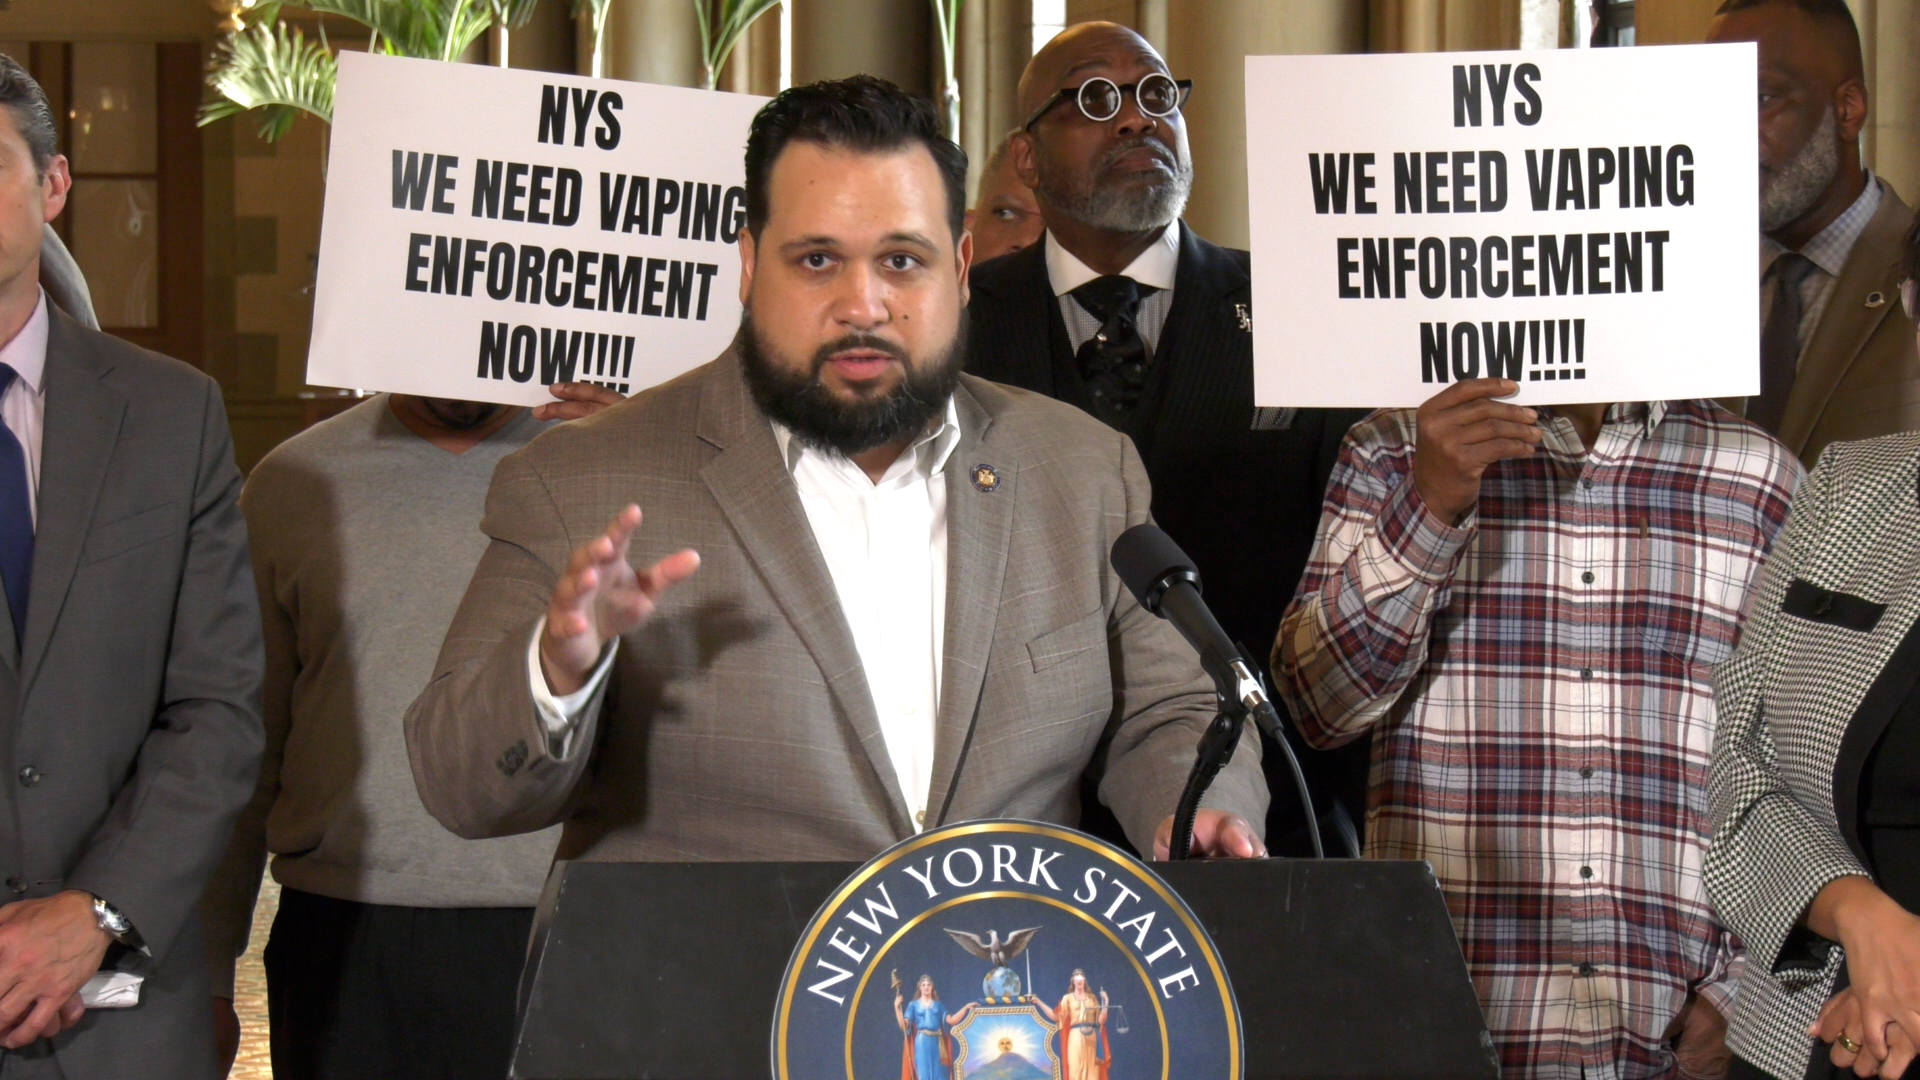 Enforcing the Ban on Illegal E-Cigarettes